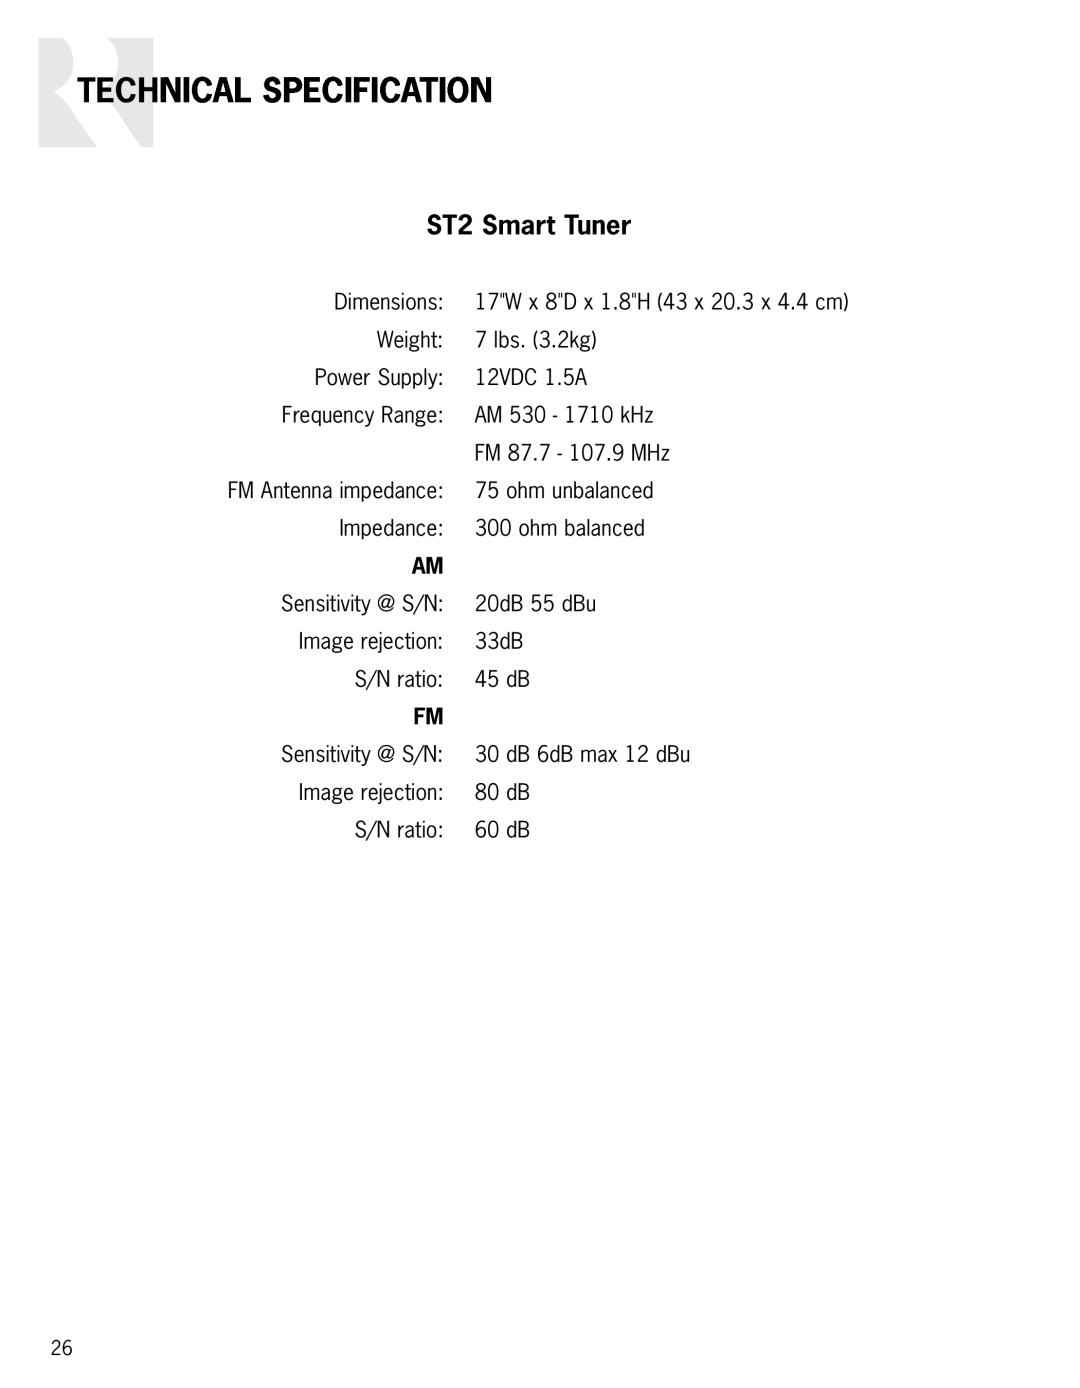 Integra instruction manual Technical Specification, ST2 Smart Tuner 